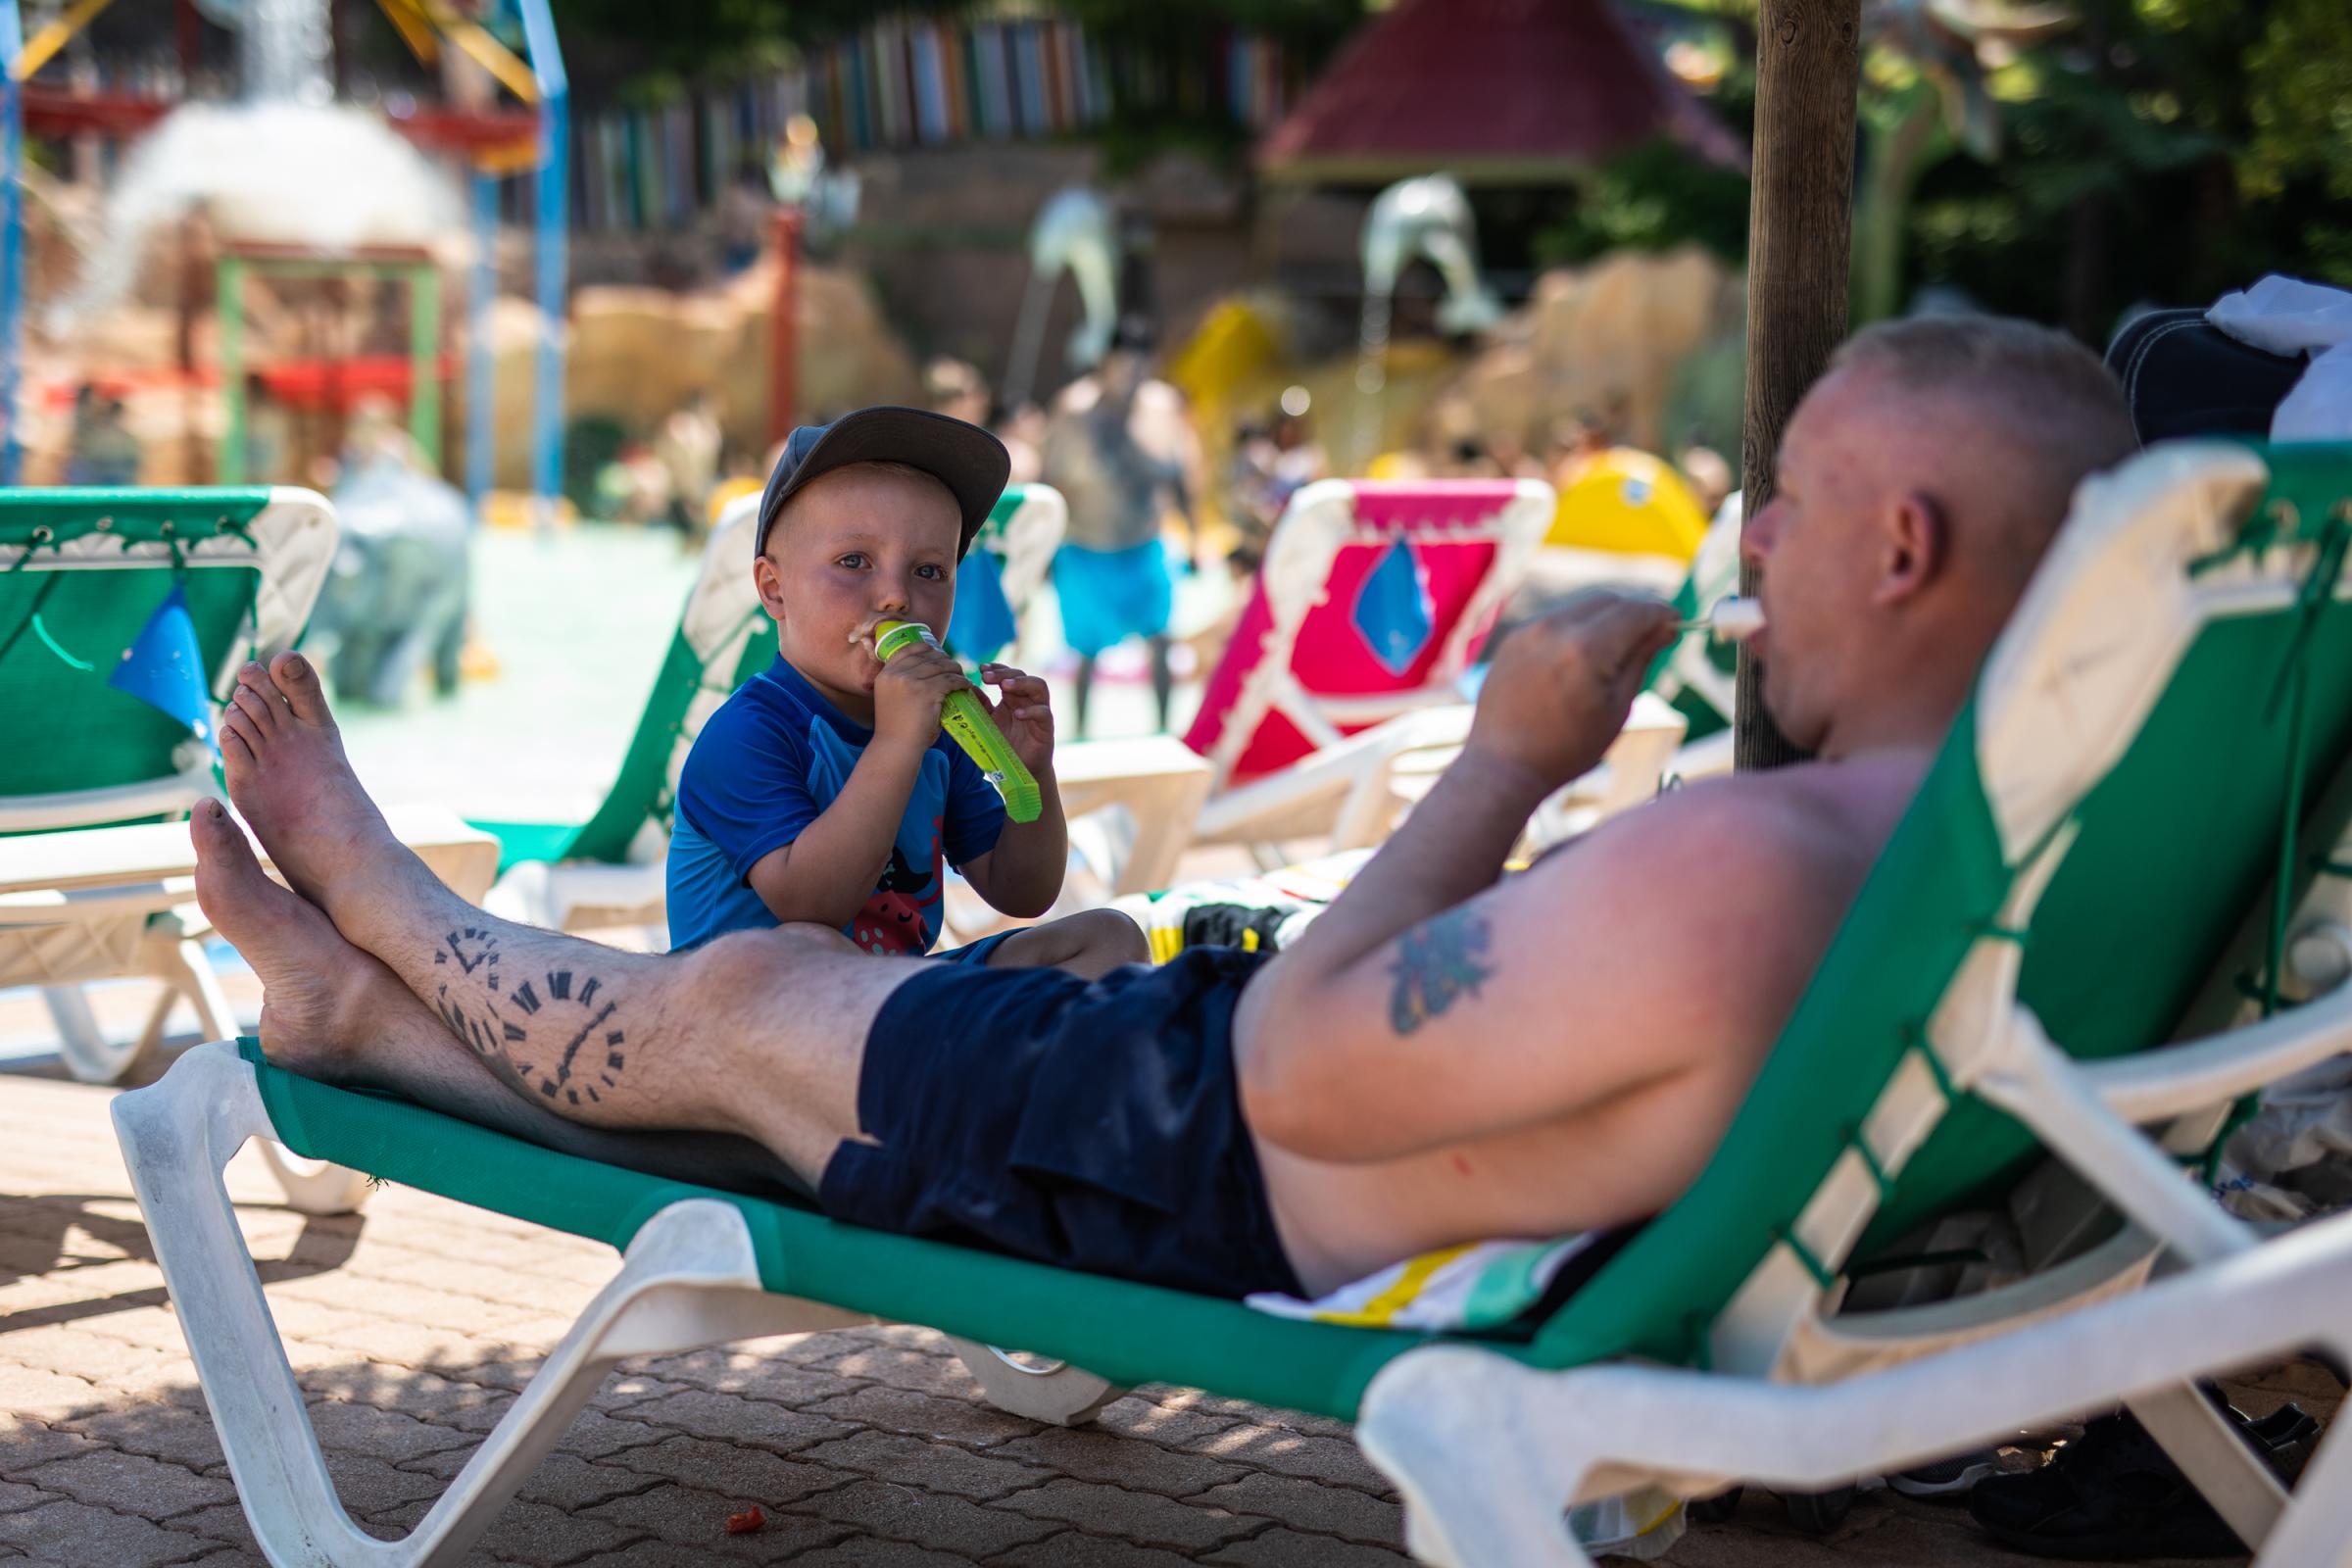 Heatwave Sweeps Across Spain - BENIDORM, SPAIN - JULY 16: A father and son eat an ice...